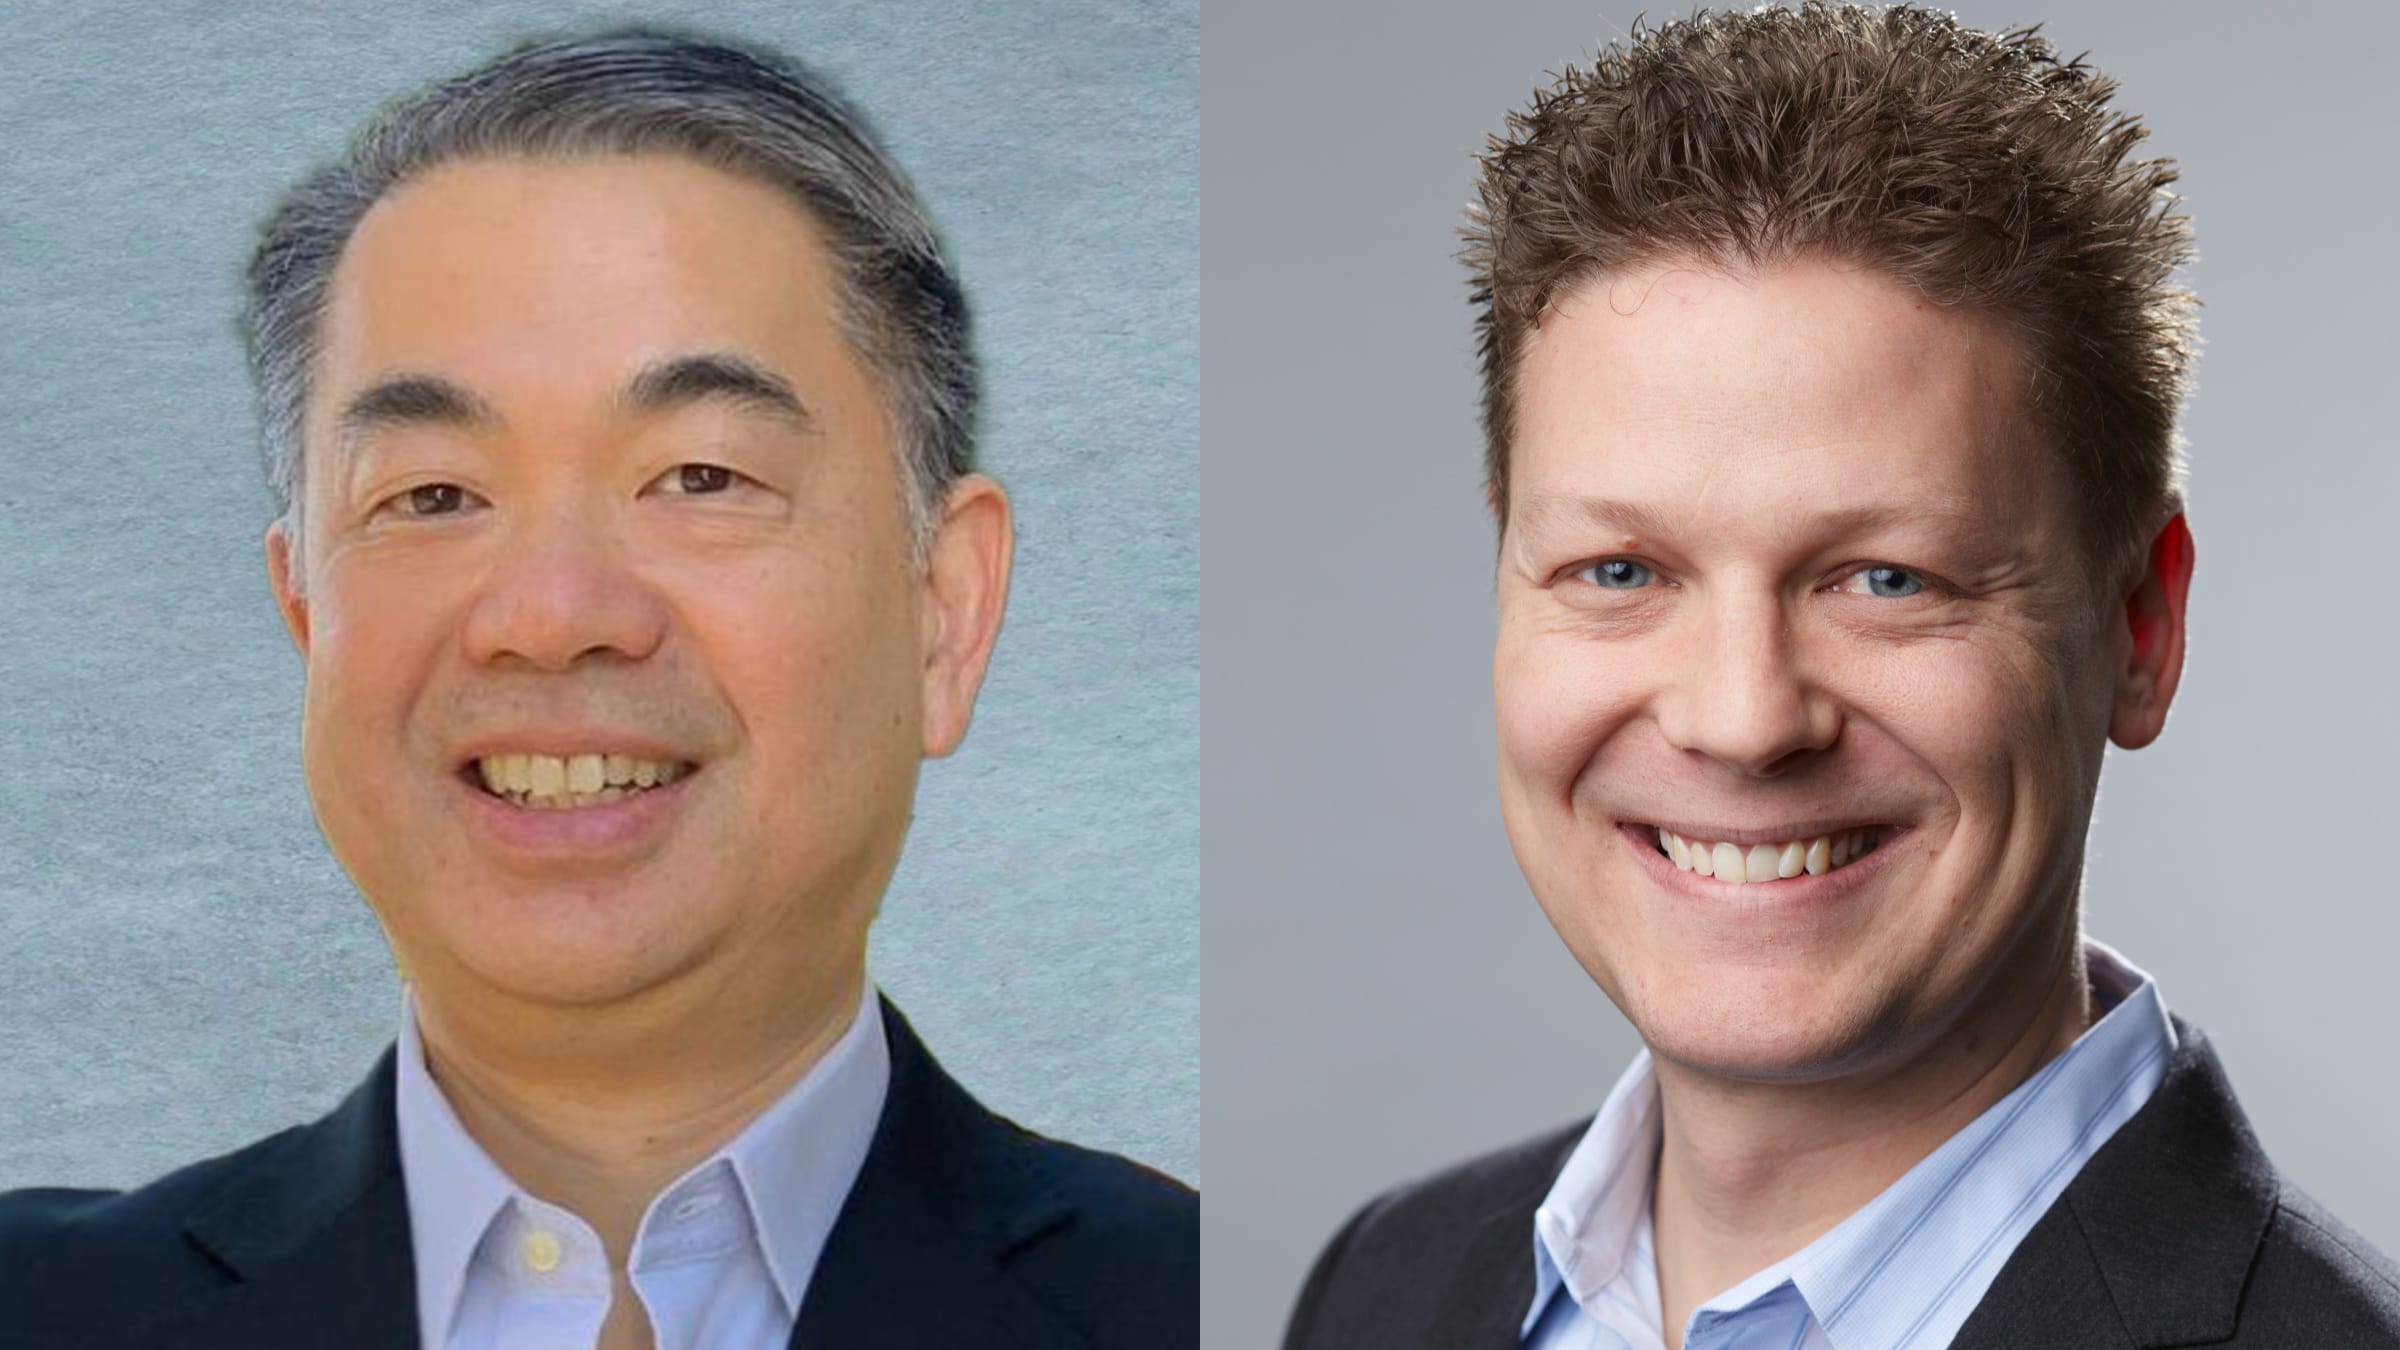 Valitor CEO Steven Lo (left) and President & CSO Wes Jackson (right)